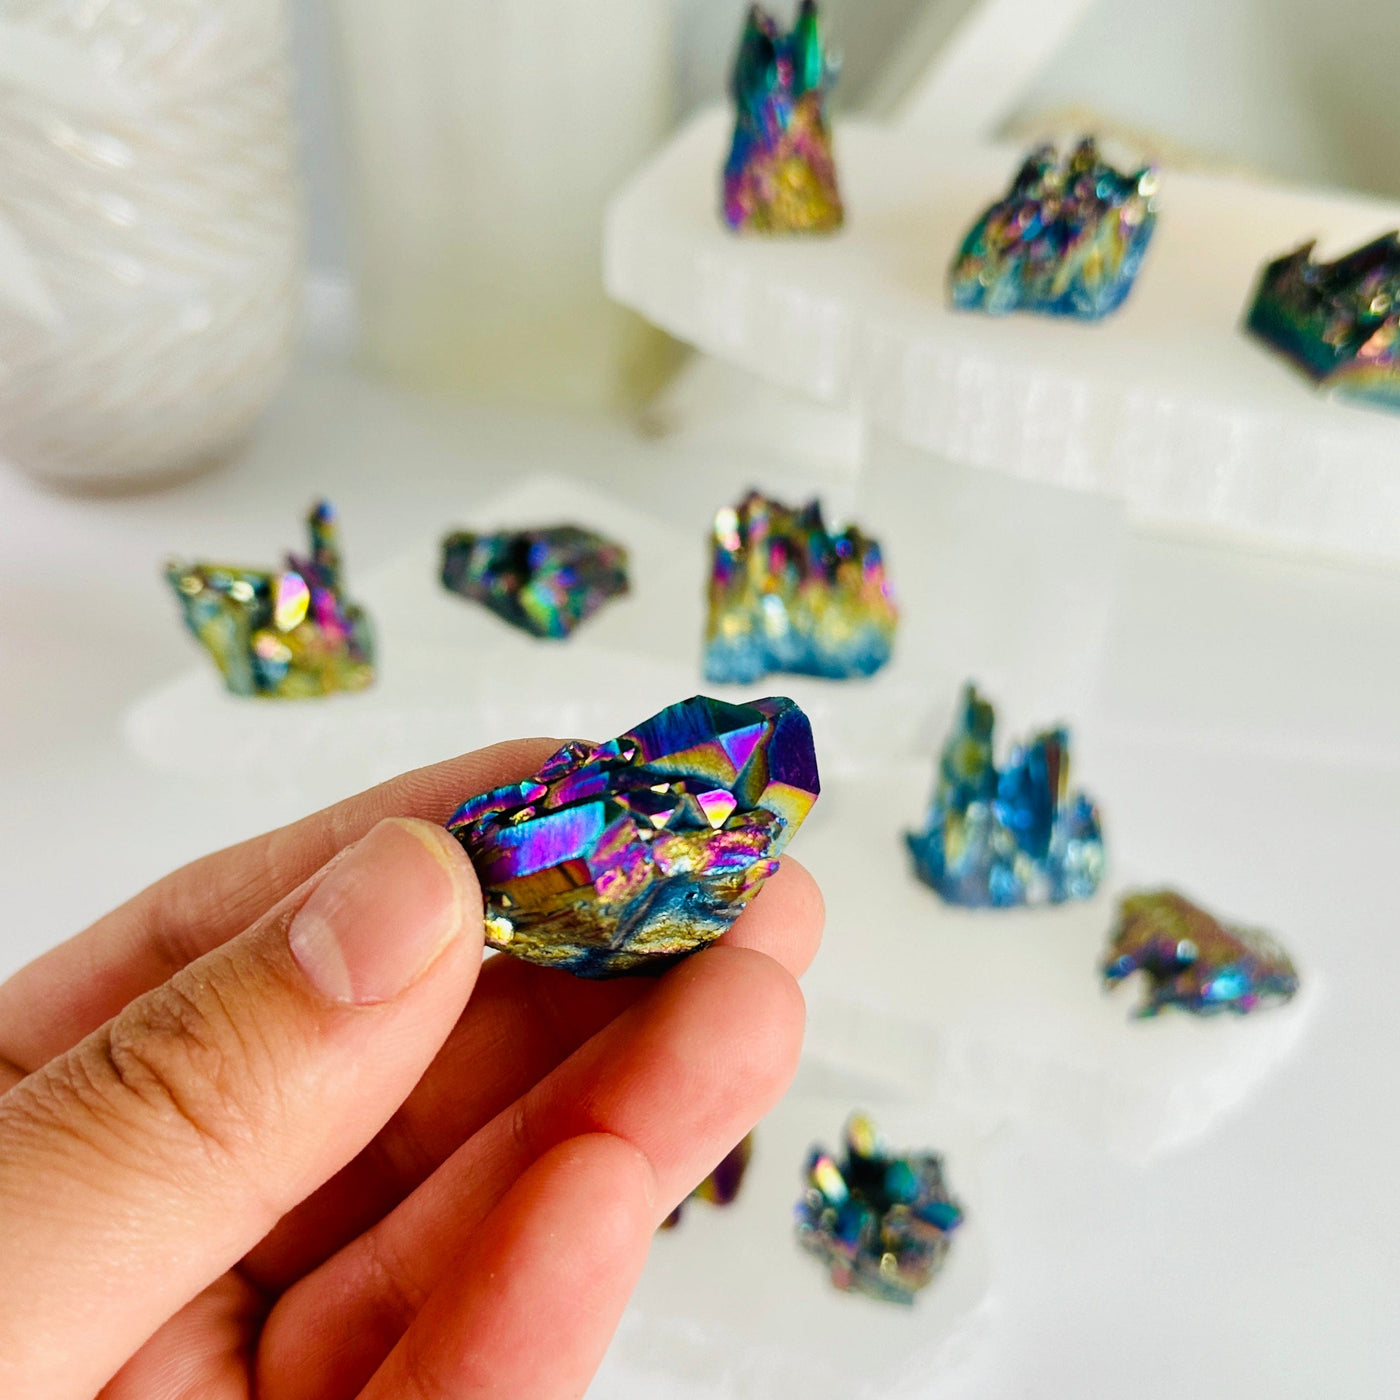 Rainbow Titanium Coated Amethyst Cluster - Small Crystal Cluster - You Choose variant 4 in hand with other variants in background for size reference